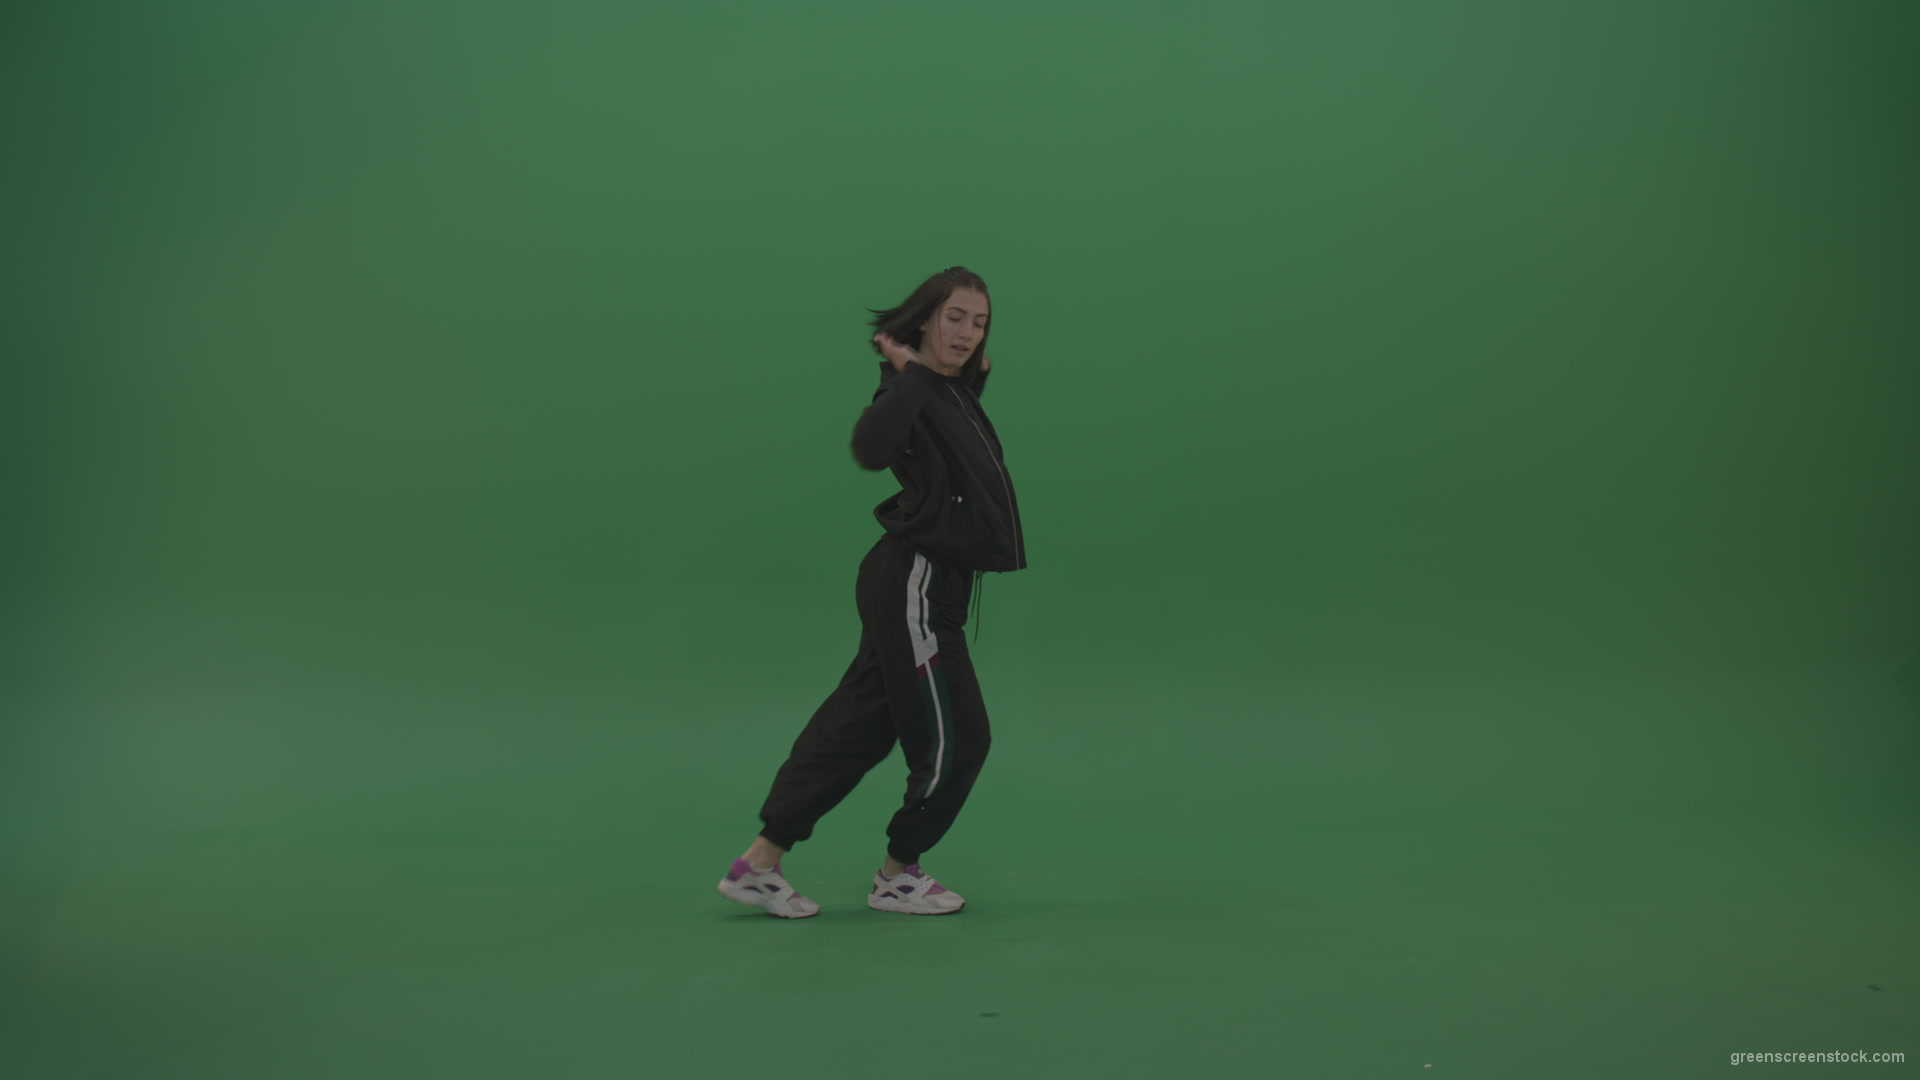 Incredible_Dance_Hip_Hop_Moves_From_Young_Brunette_Female_Wearing_Black_Sweat_Suite_And_White_Trainers_On_Green_Screen_Wall_Background_002 Green Screen Stock